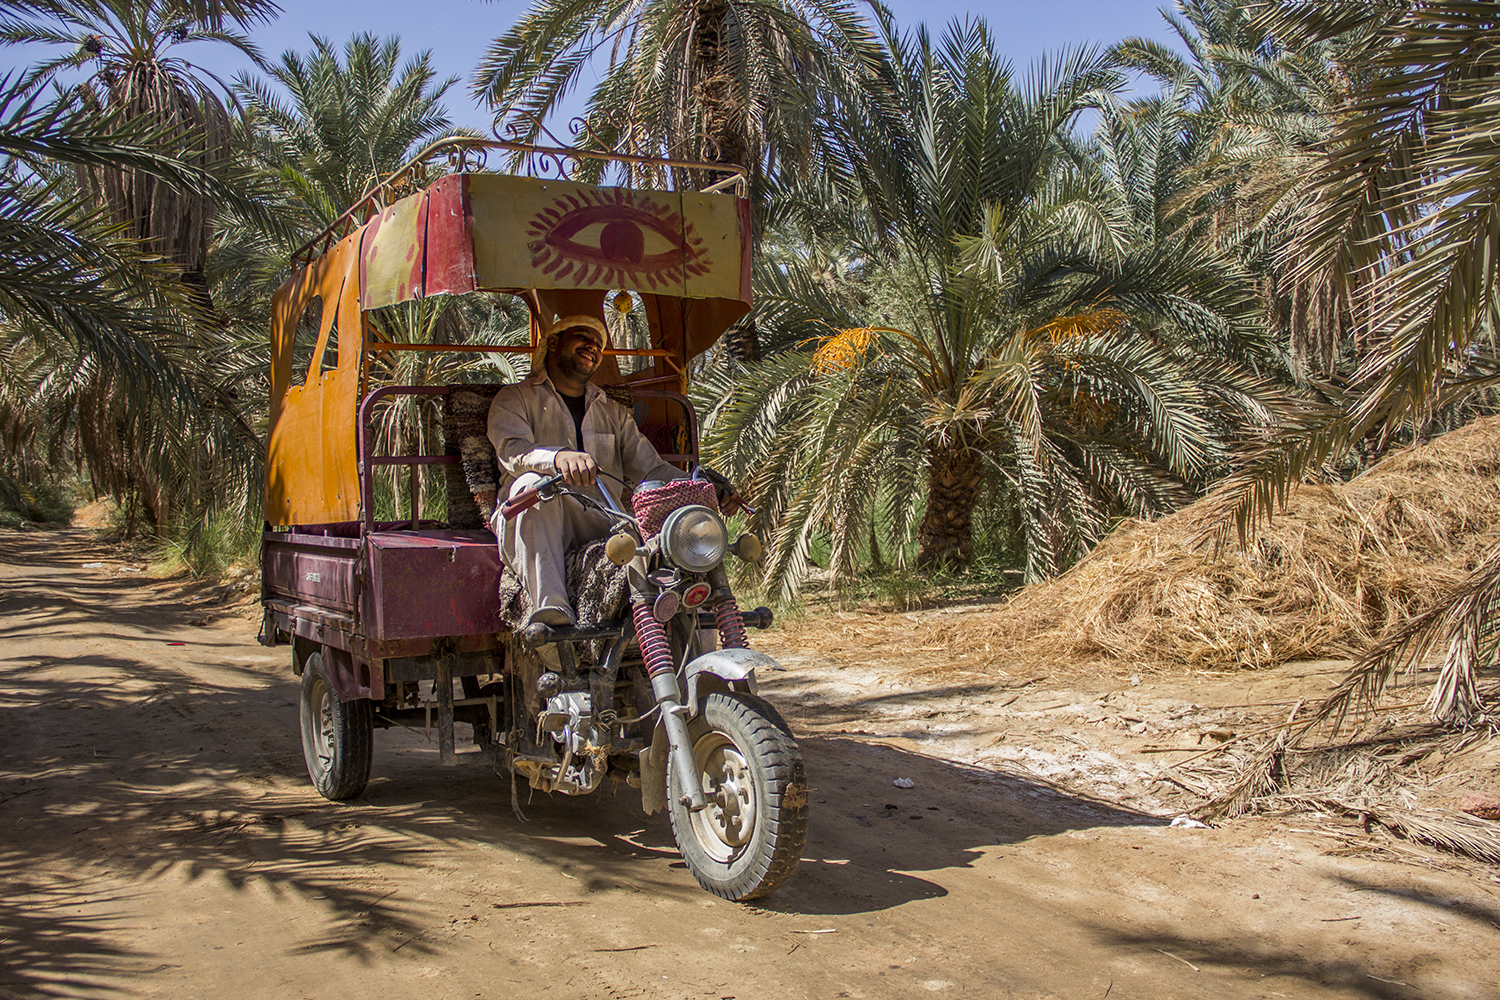 Youssef, one of many tricycle driver around the Oasis